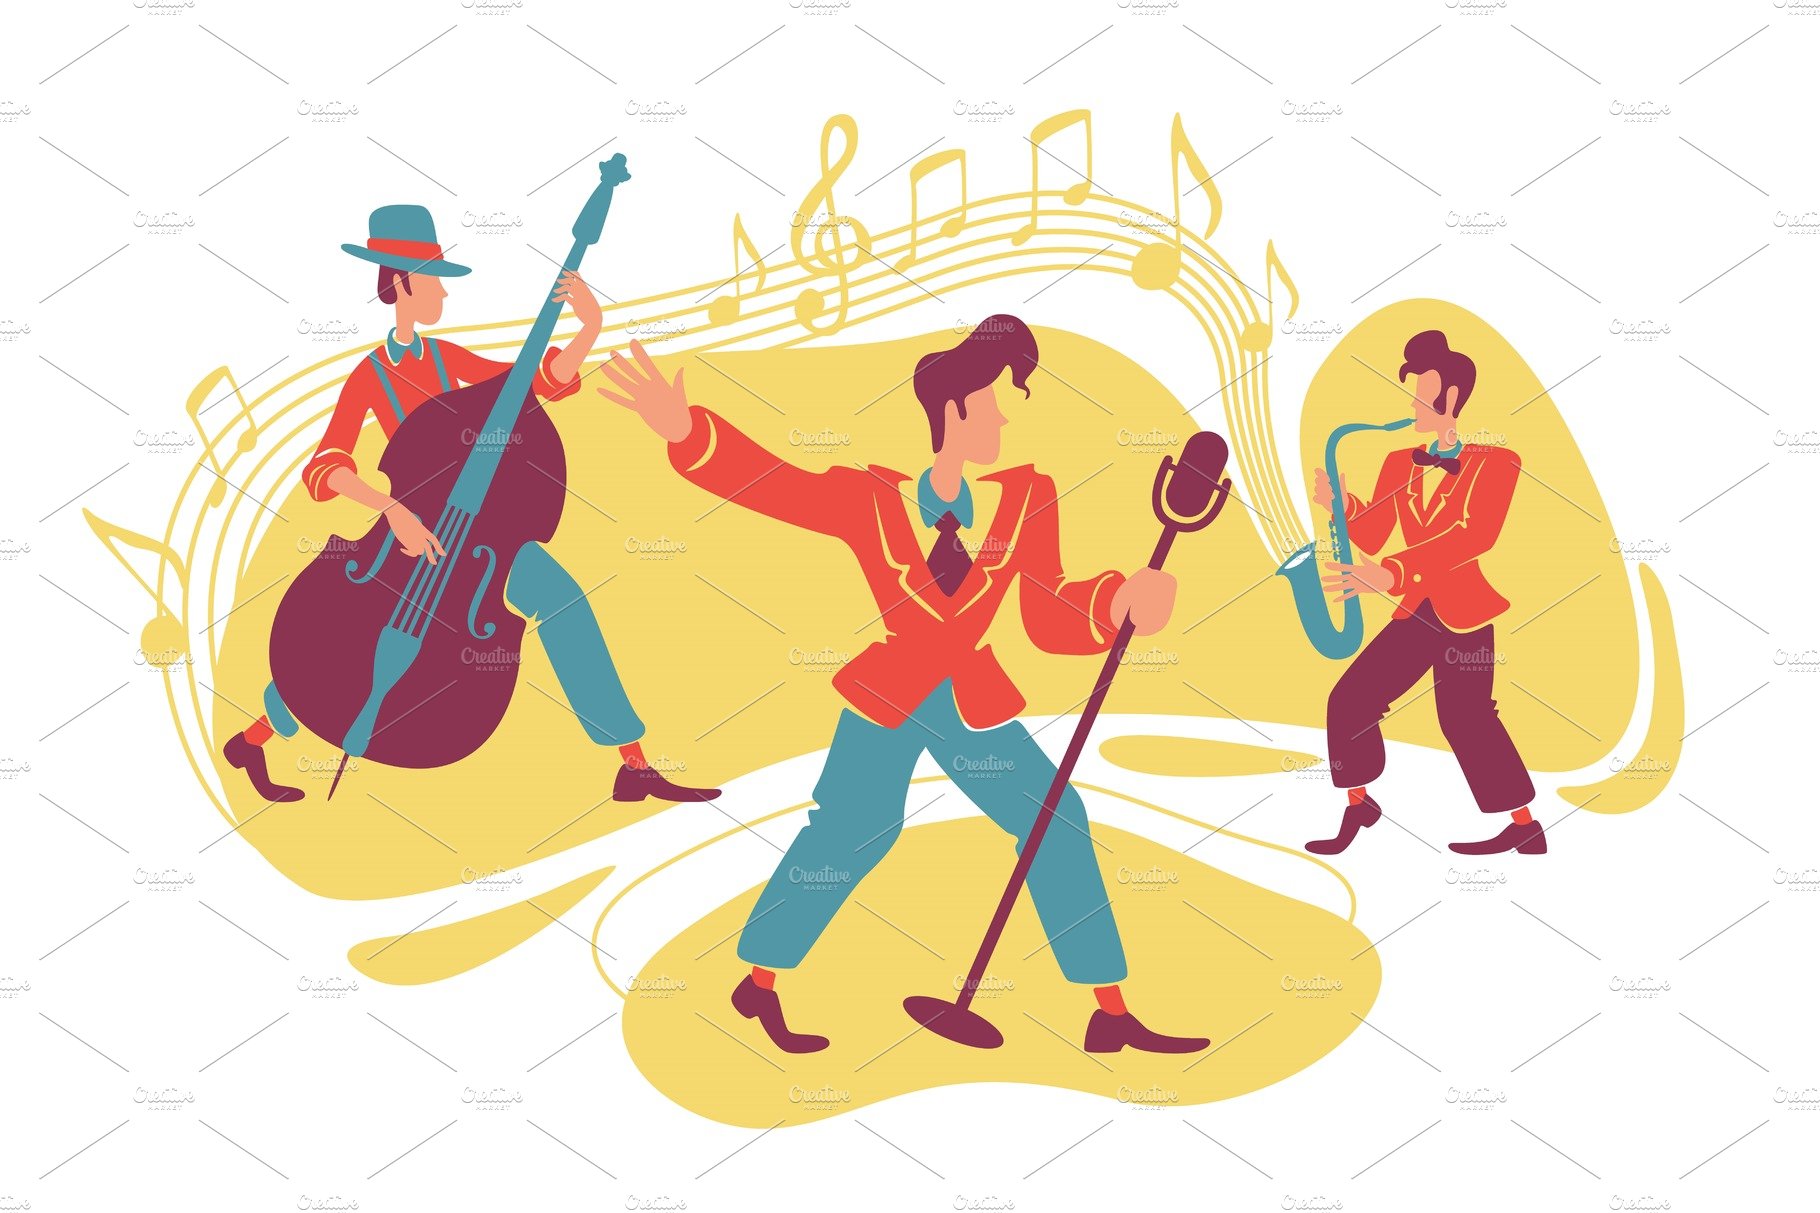 Jazz swing show cover image.